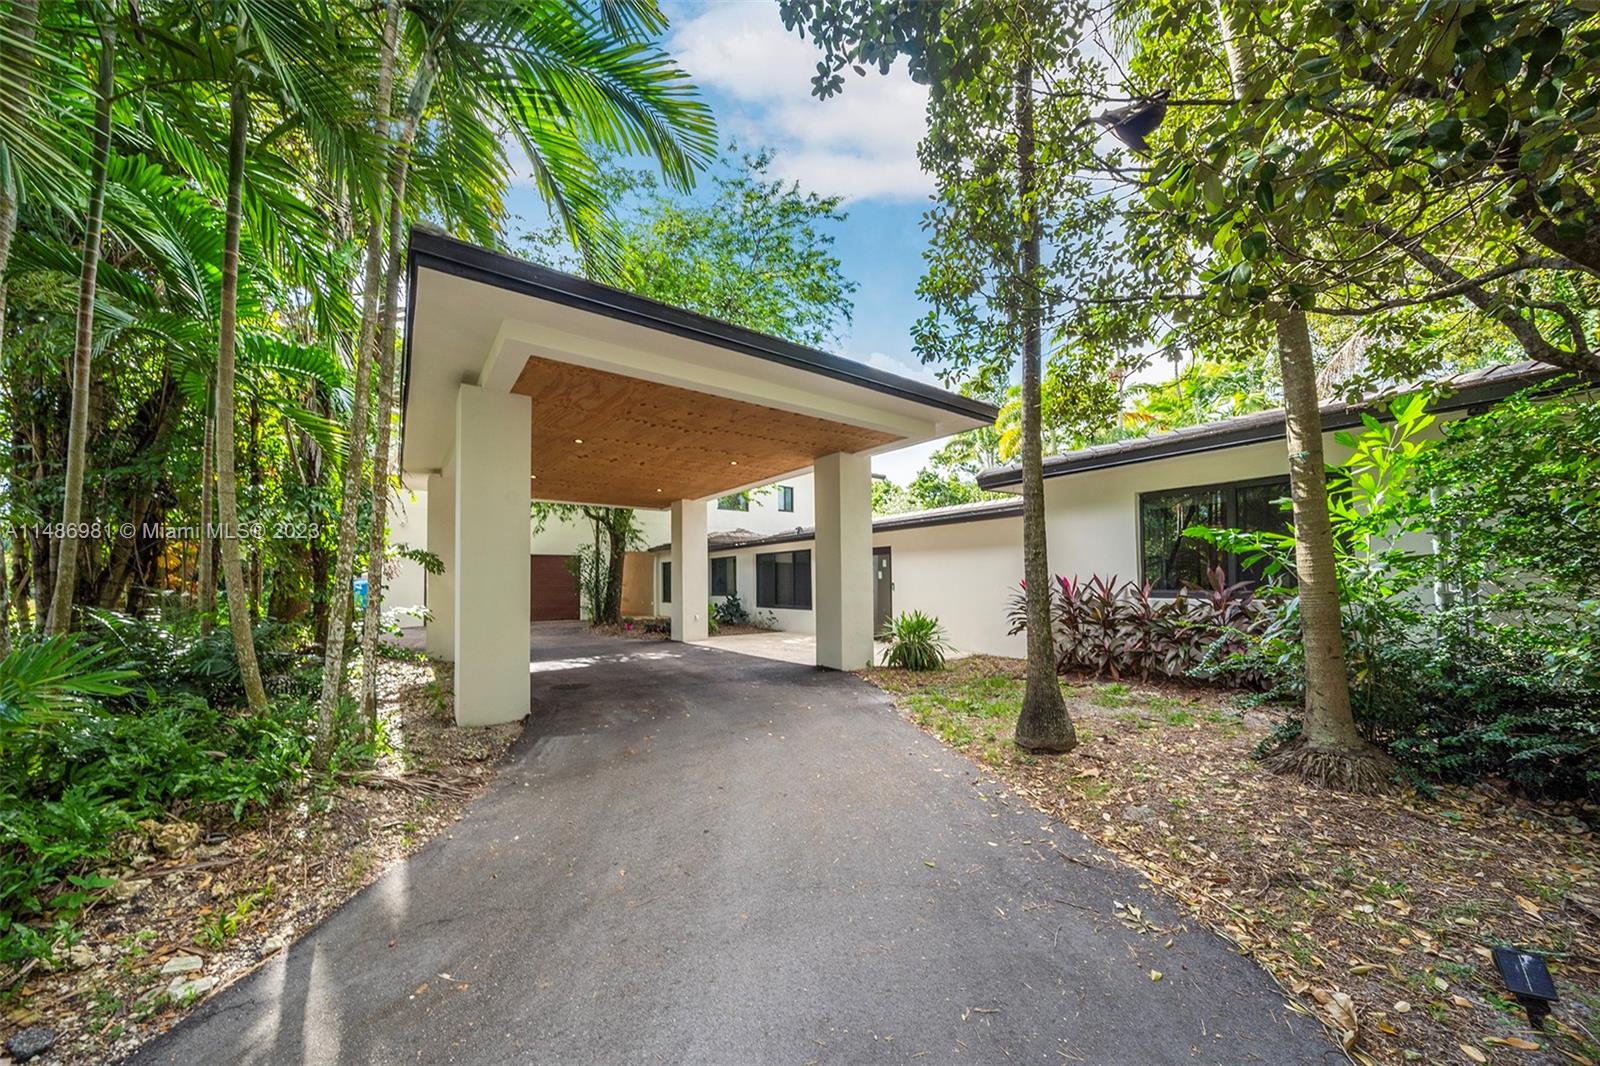 A one of a kind tropical oasis in South Miami. This unique property has been completely transformed, sitting on over an acre lot. Some impressive features include: A fully remodeled kitchen with ample amount of cabinet space, a U-shaped driveway w/ covered parking, All bedrooms have their own private bathroom, a mother-in-law suite, a Master suite with a balcony,  a stunning master bathroom spa, a personal Office/ meditation room, a fenced dog run on the side of the home, an oversized bonus room currently being used as the pet spa attached to the 2 car garage & can be converted to an at-home gym. The backyard is an oasis with a summer kitchen, custom treehouse, & fully matured mango trees. Plenty of space for an at-home garden & so much more. Come check it out!